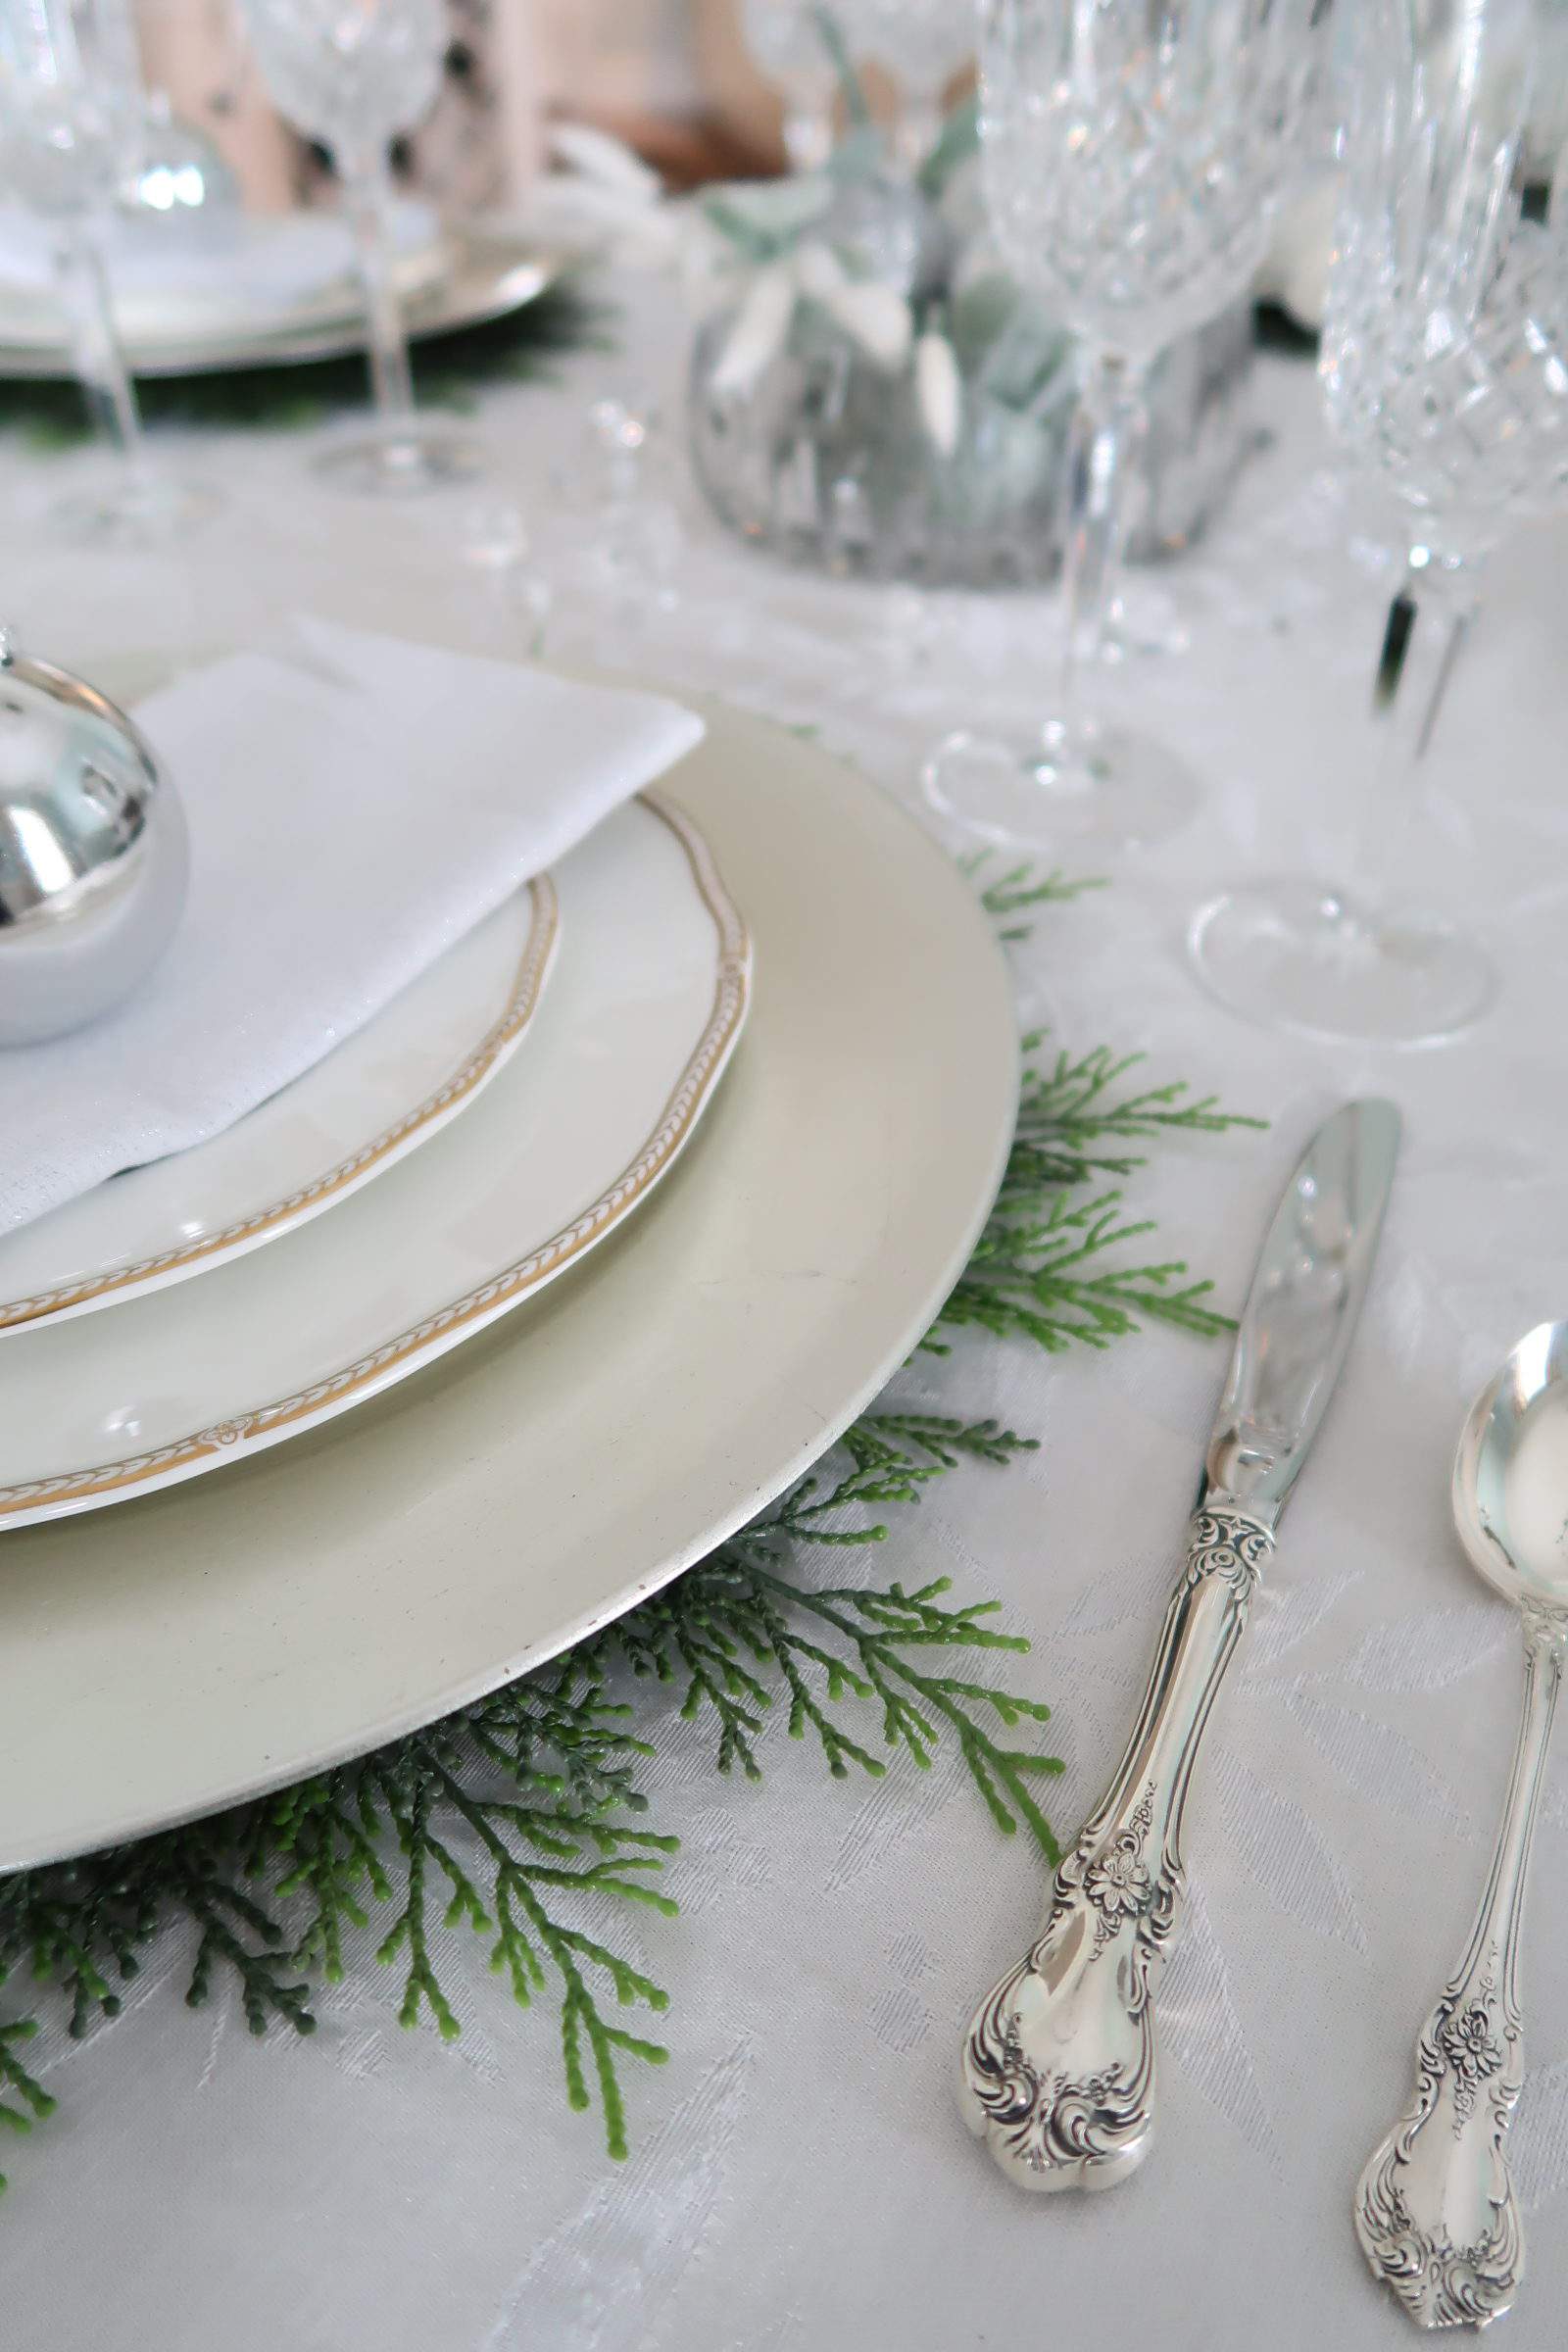 Layers of the Gold and Silver Place Setting